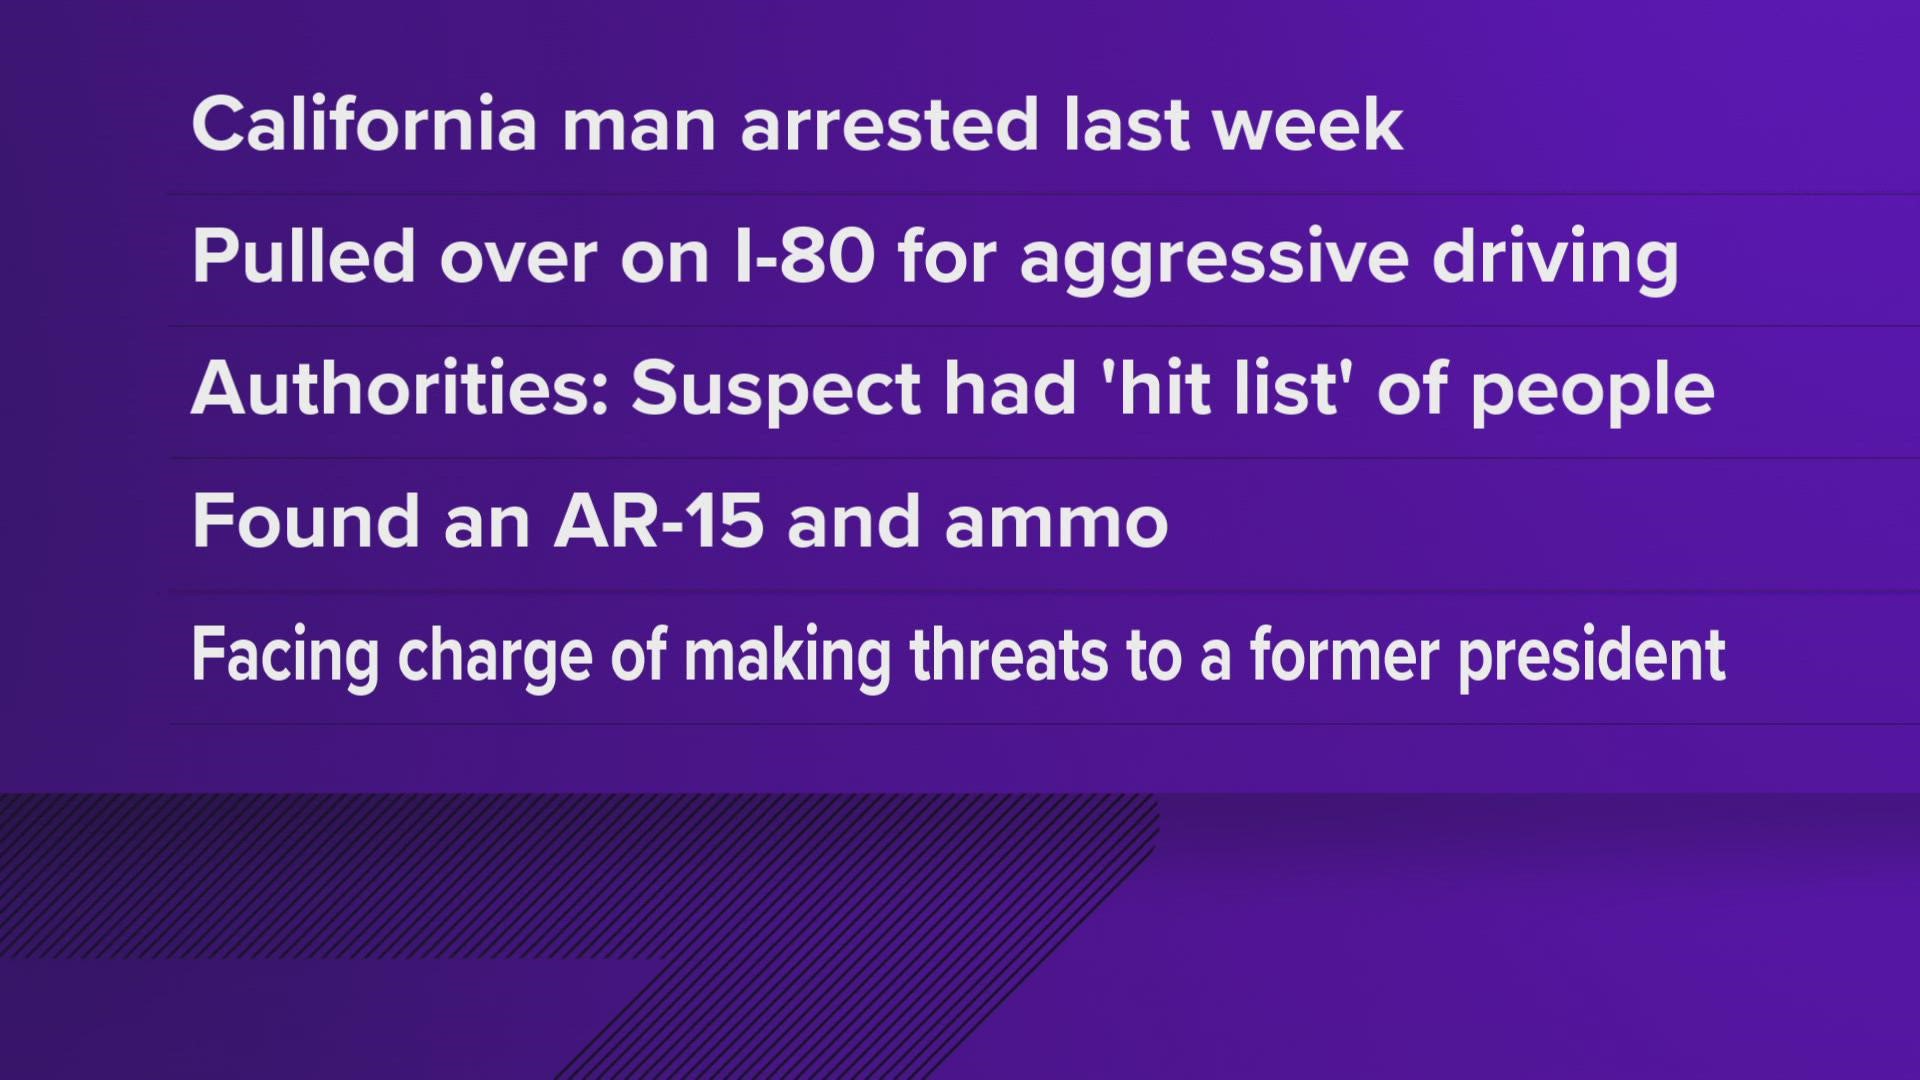 The man was arrested after being pulled over for aggressive driving.